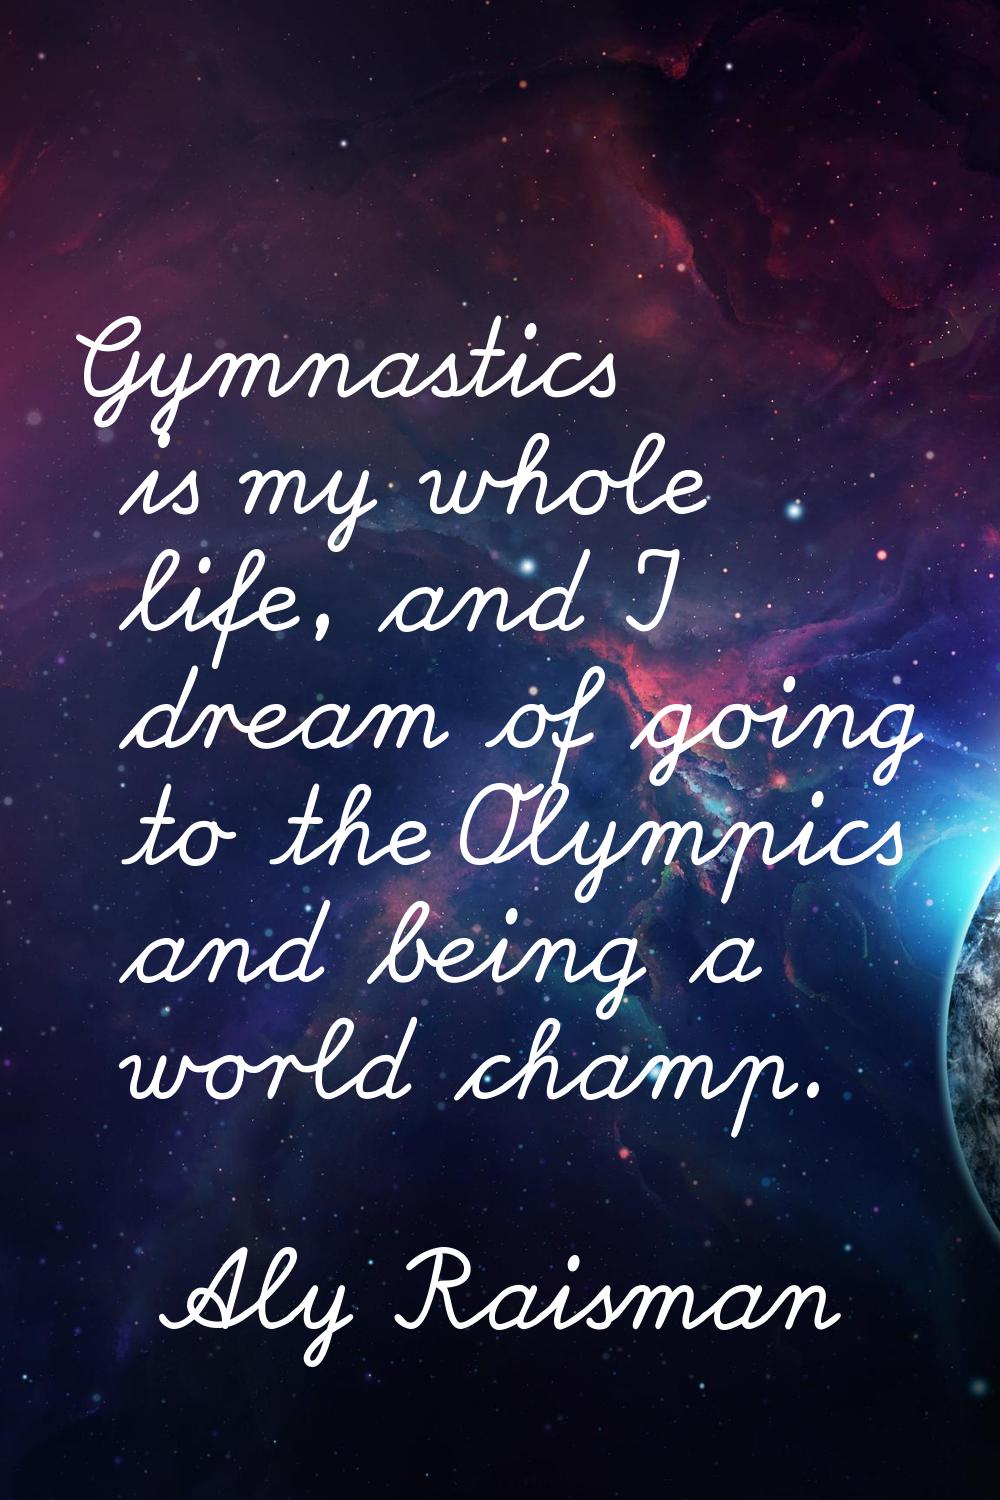 Gymnastics is my whole life, and I dream of going to the Olympics and being a world champ.